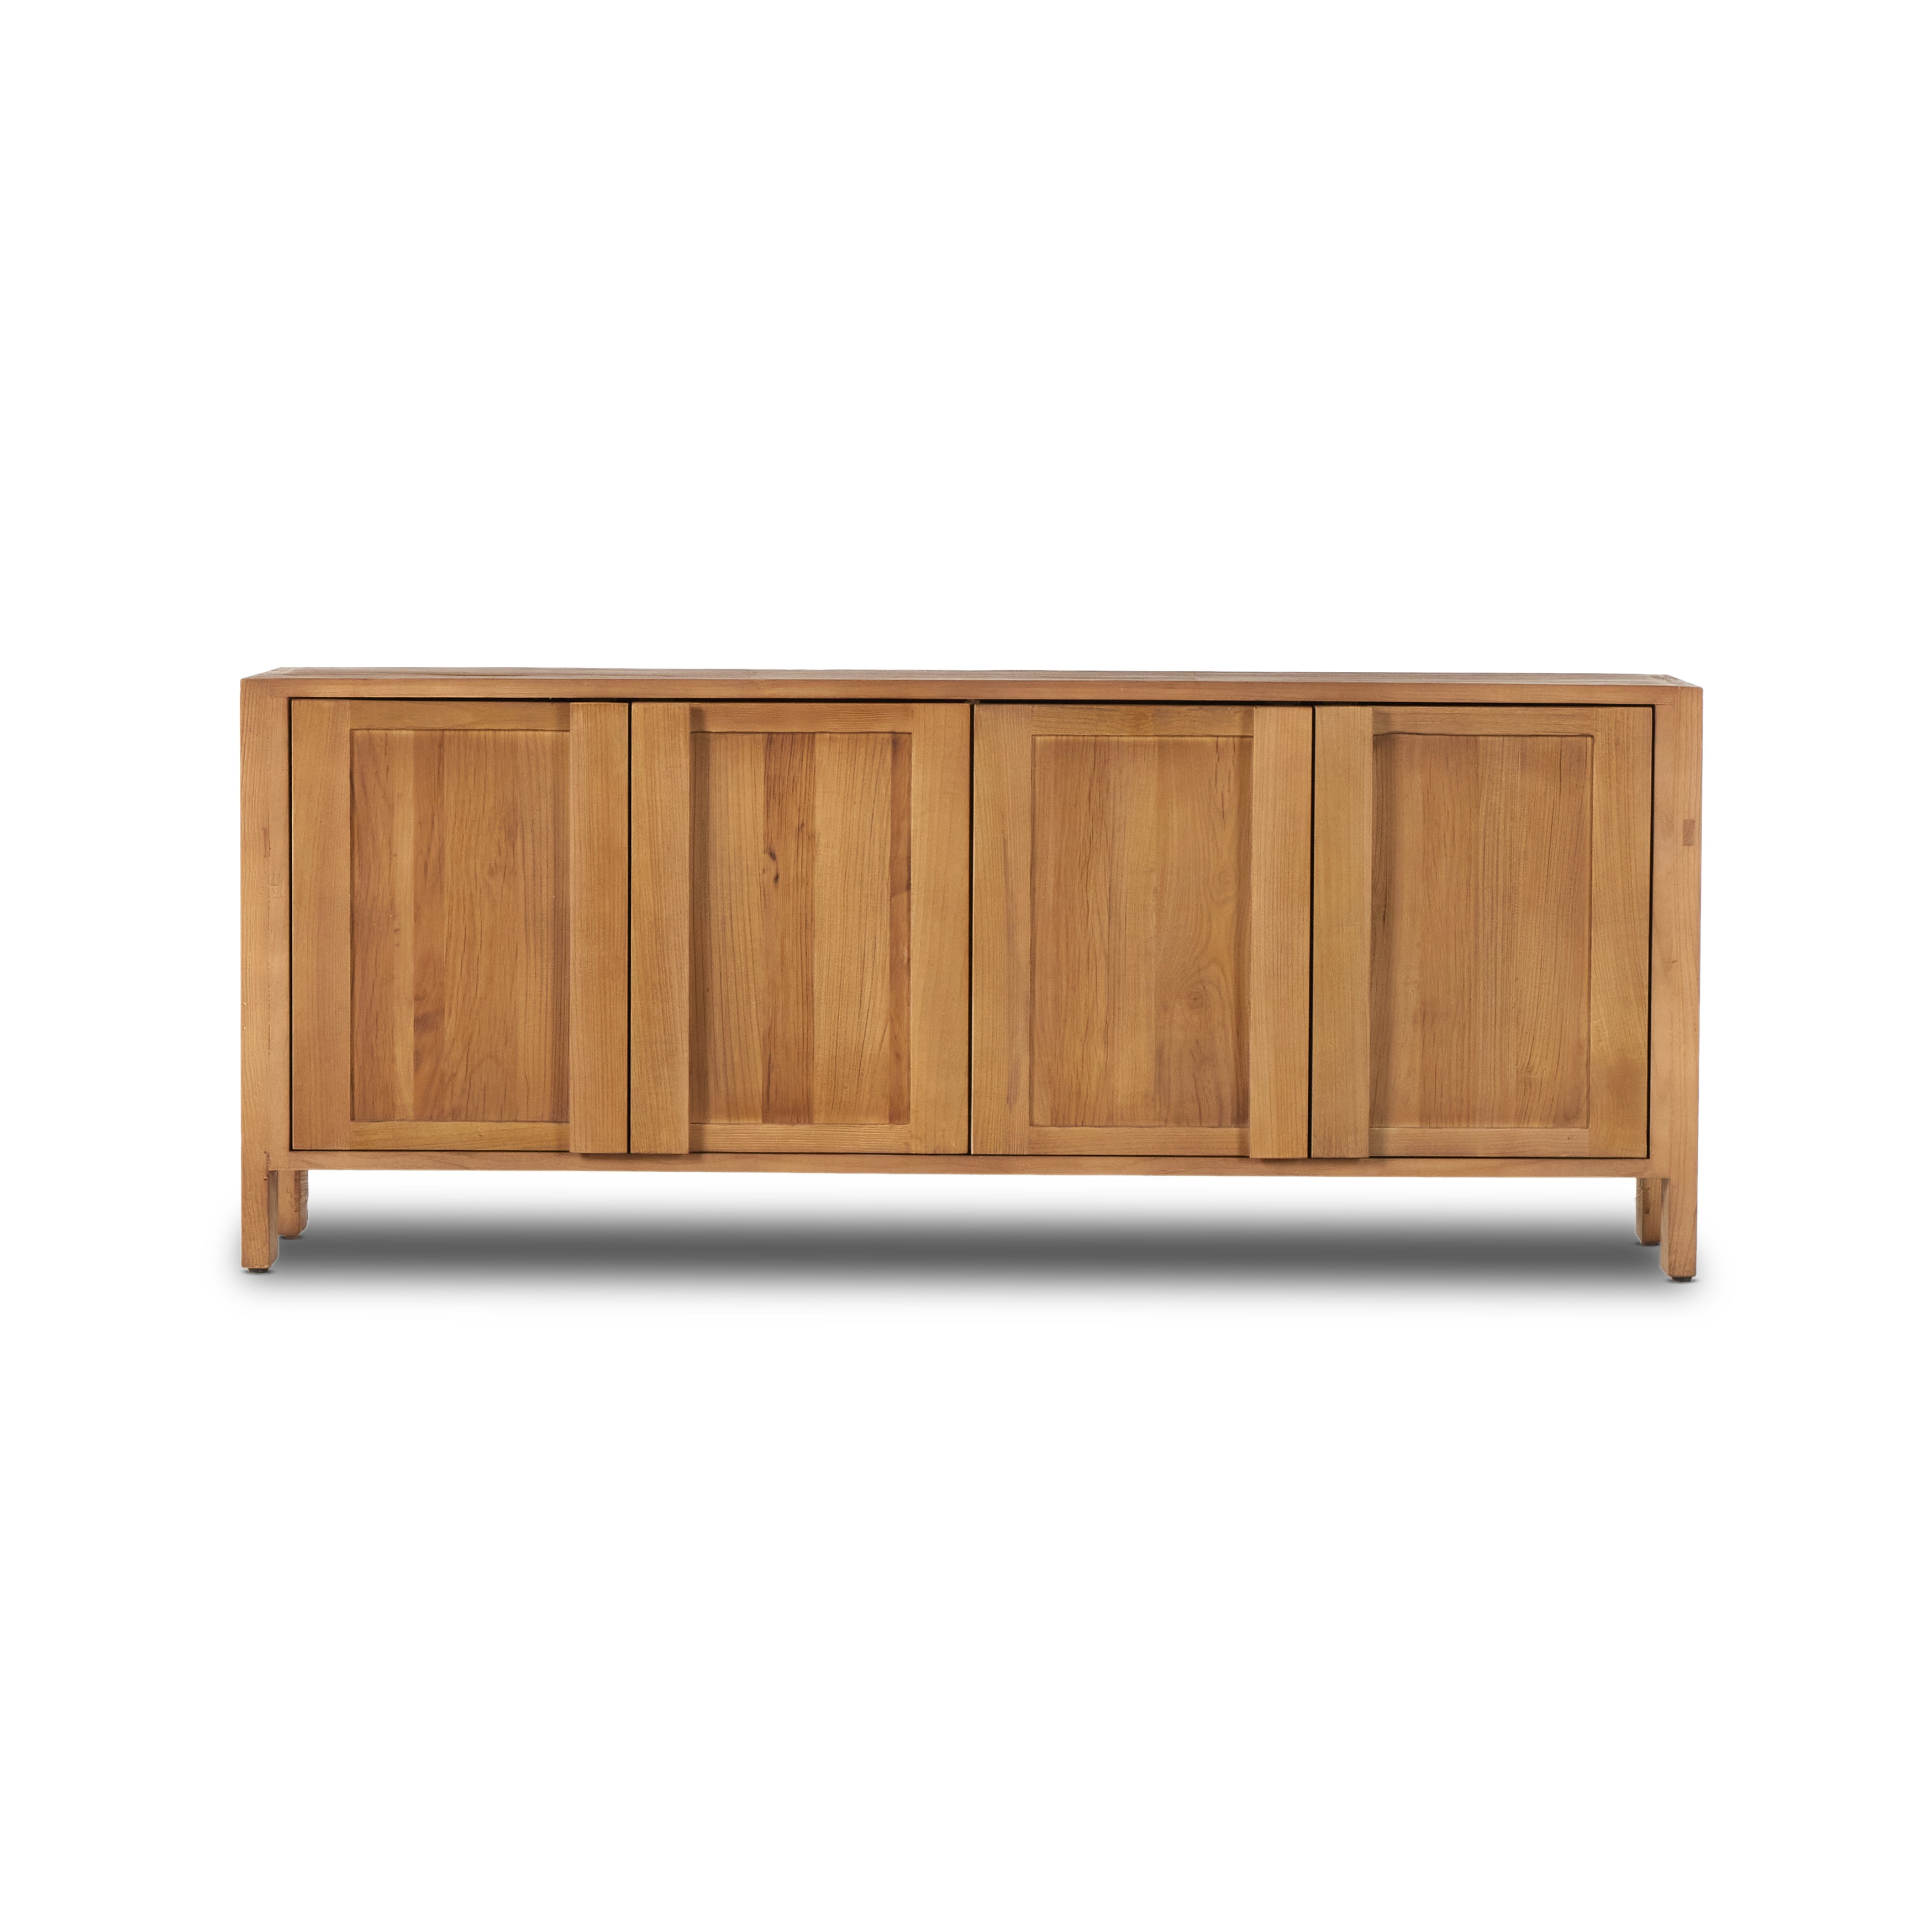 Inspired by Swedish folk design, natural elm crafts the frame and panel structure of this sideboard. Designed without hardware, the raised panels of the doors have a cutout to serve as handles, offering a clean appearance that offers practical function. Amethyst Home provides interior design, new construction, custom furniture, and area rugs in the Miami metro area.